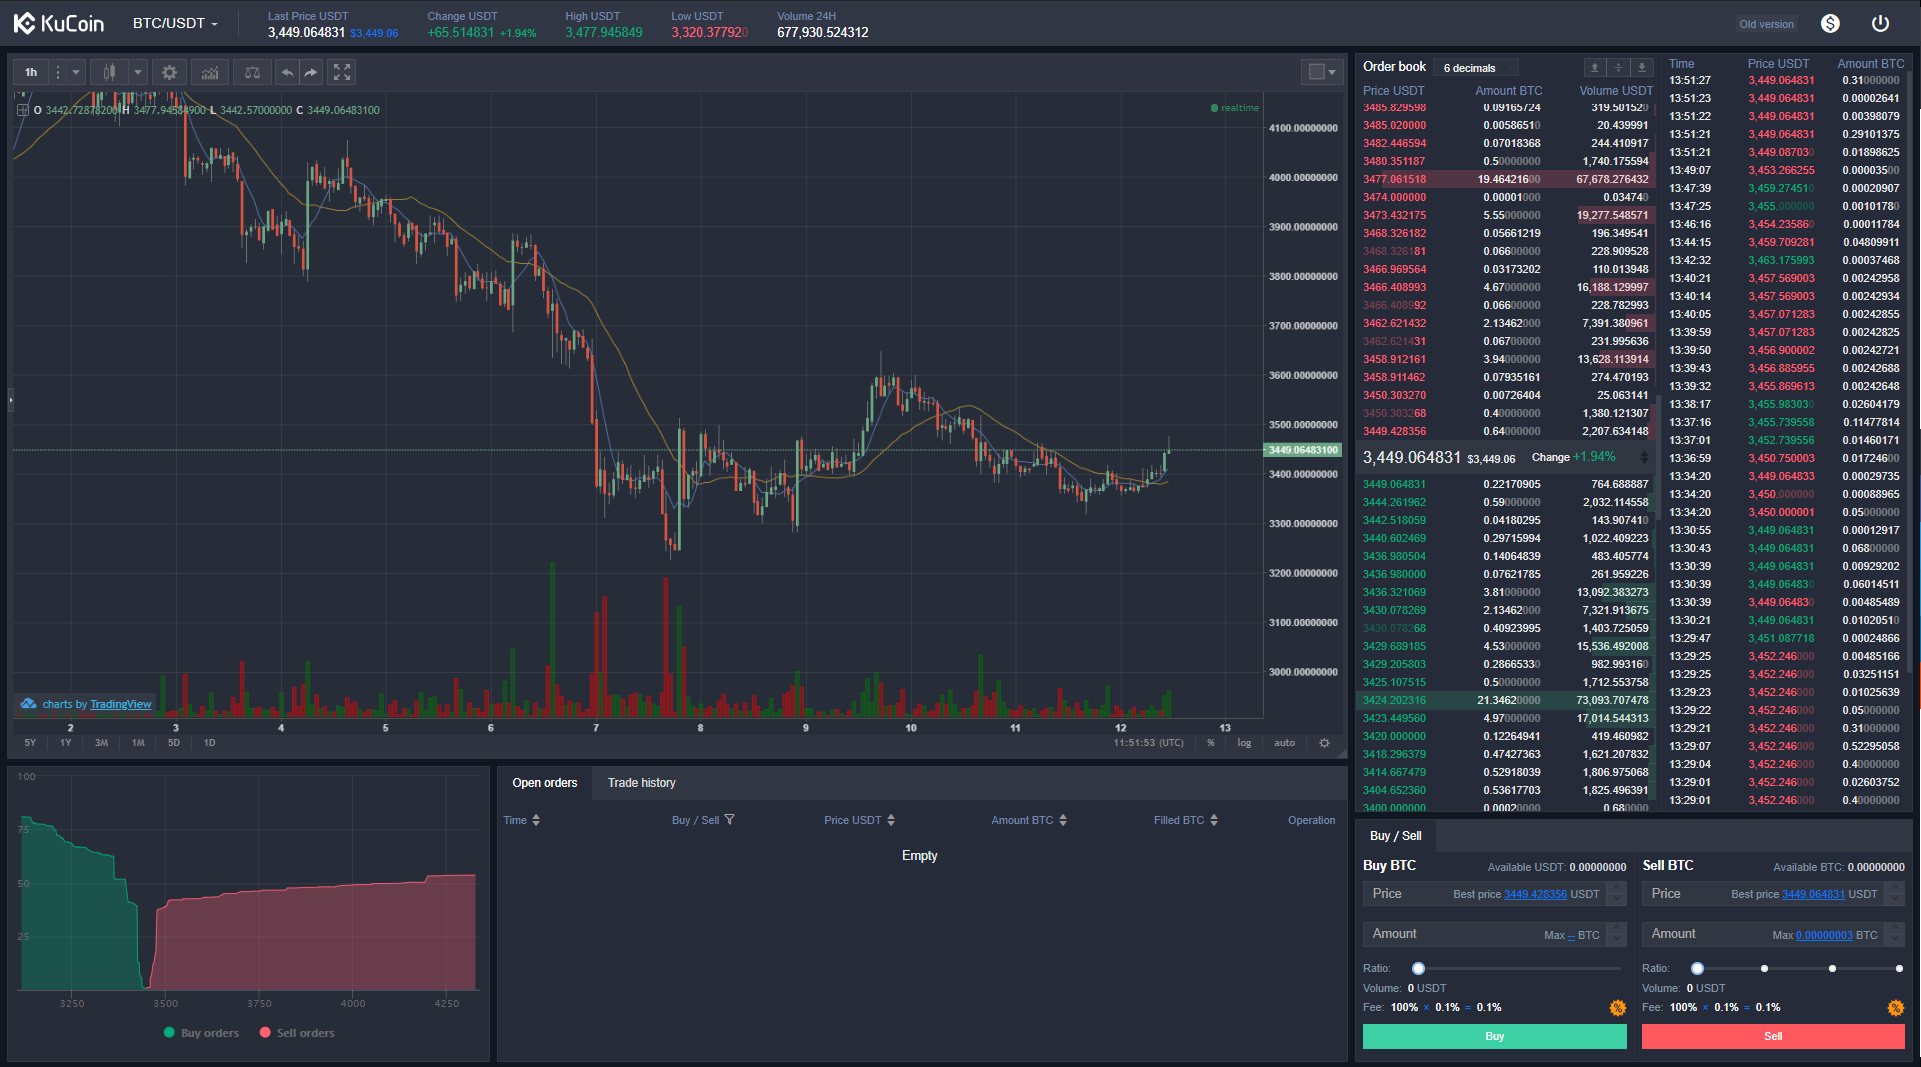 The desktop interface for trading at the KuCoin exchange 